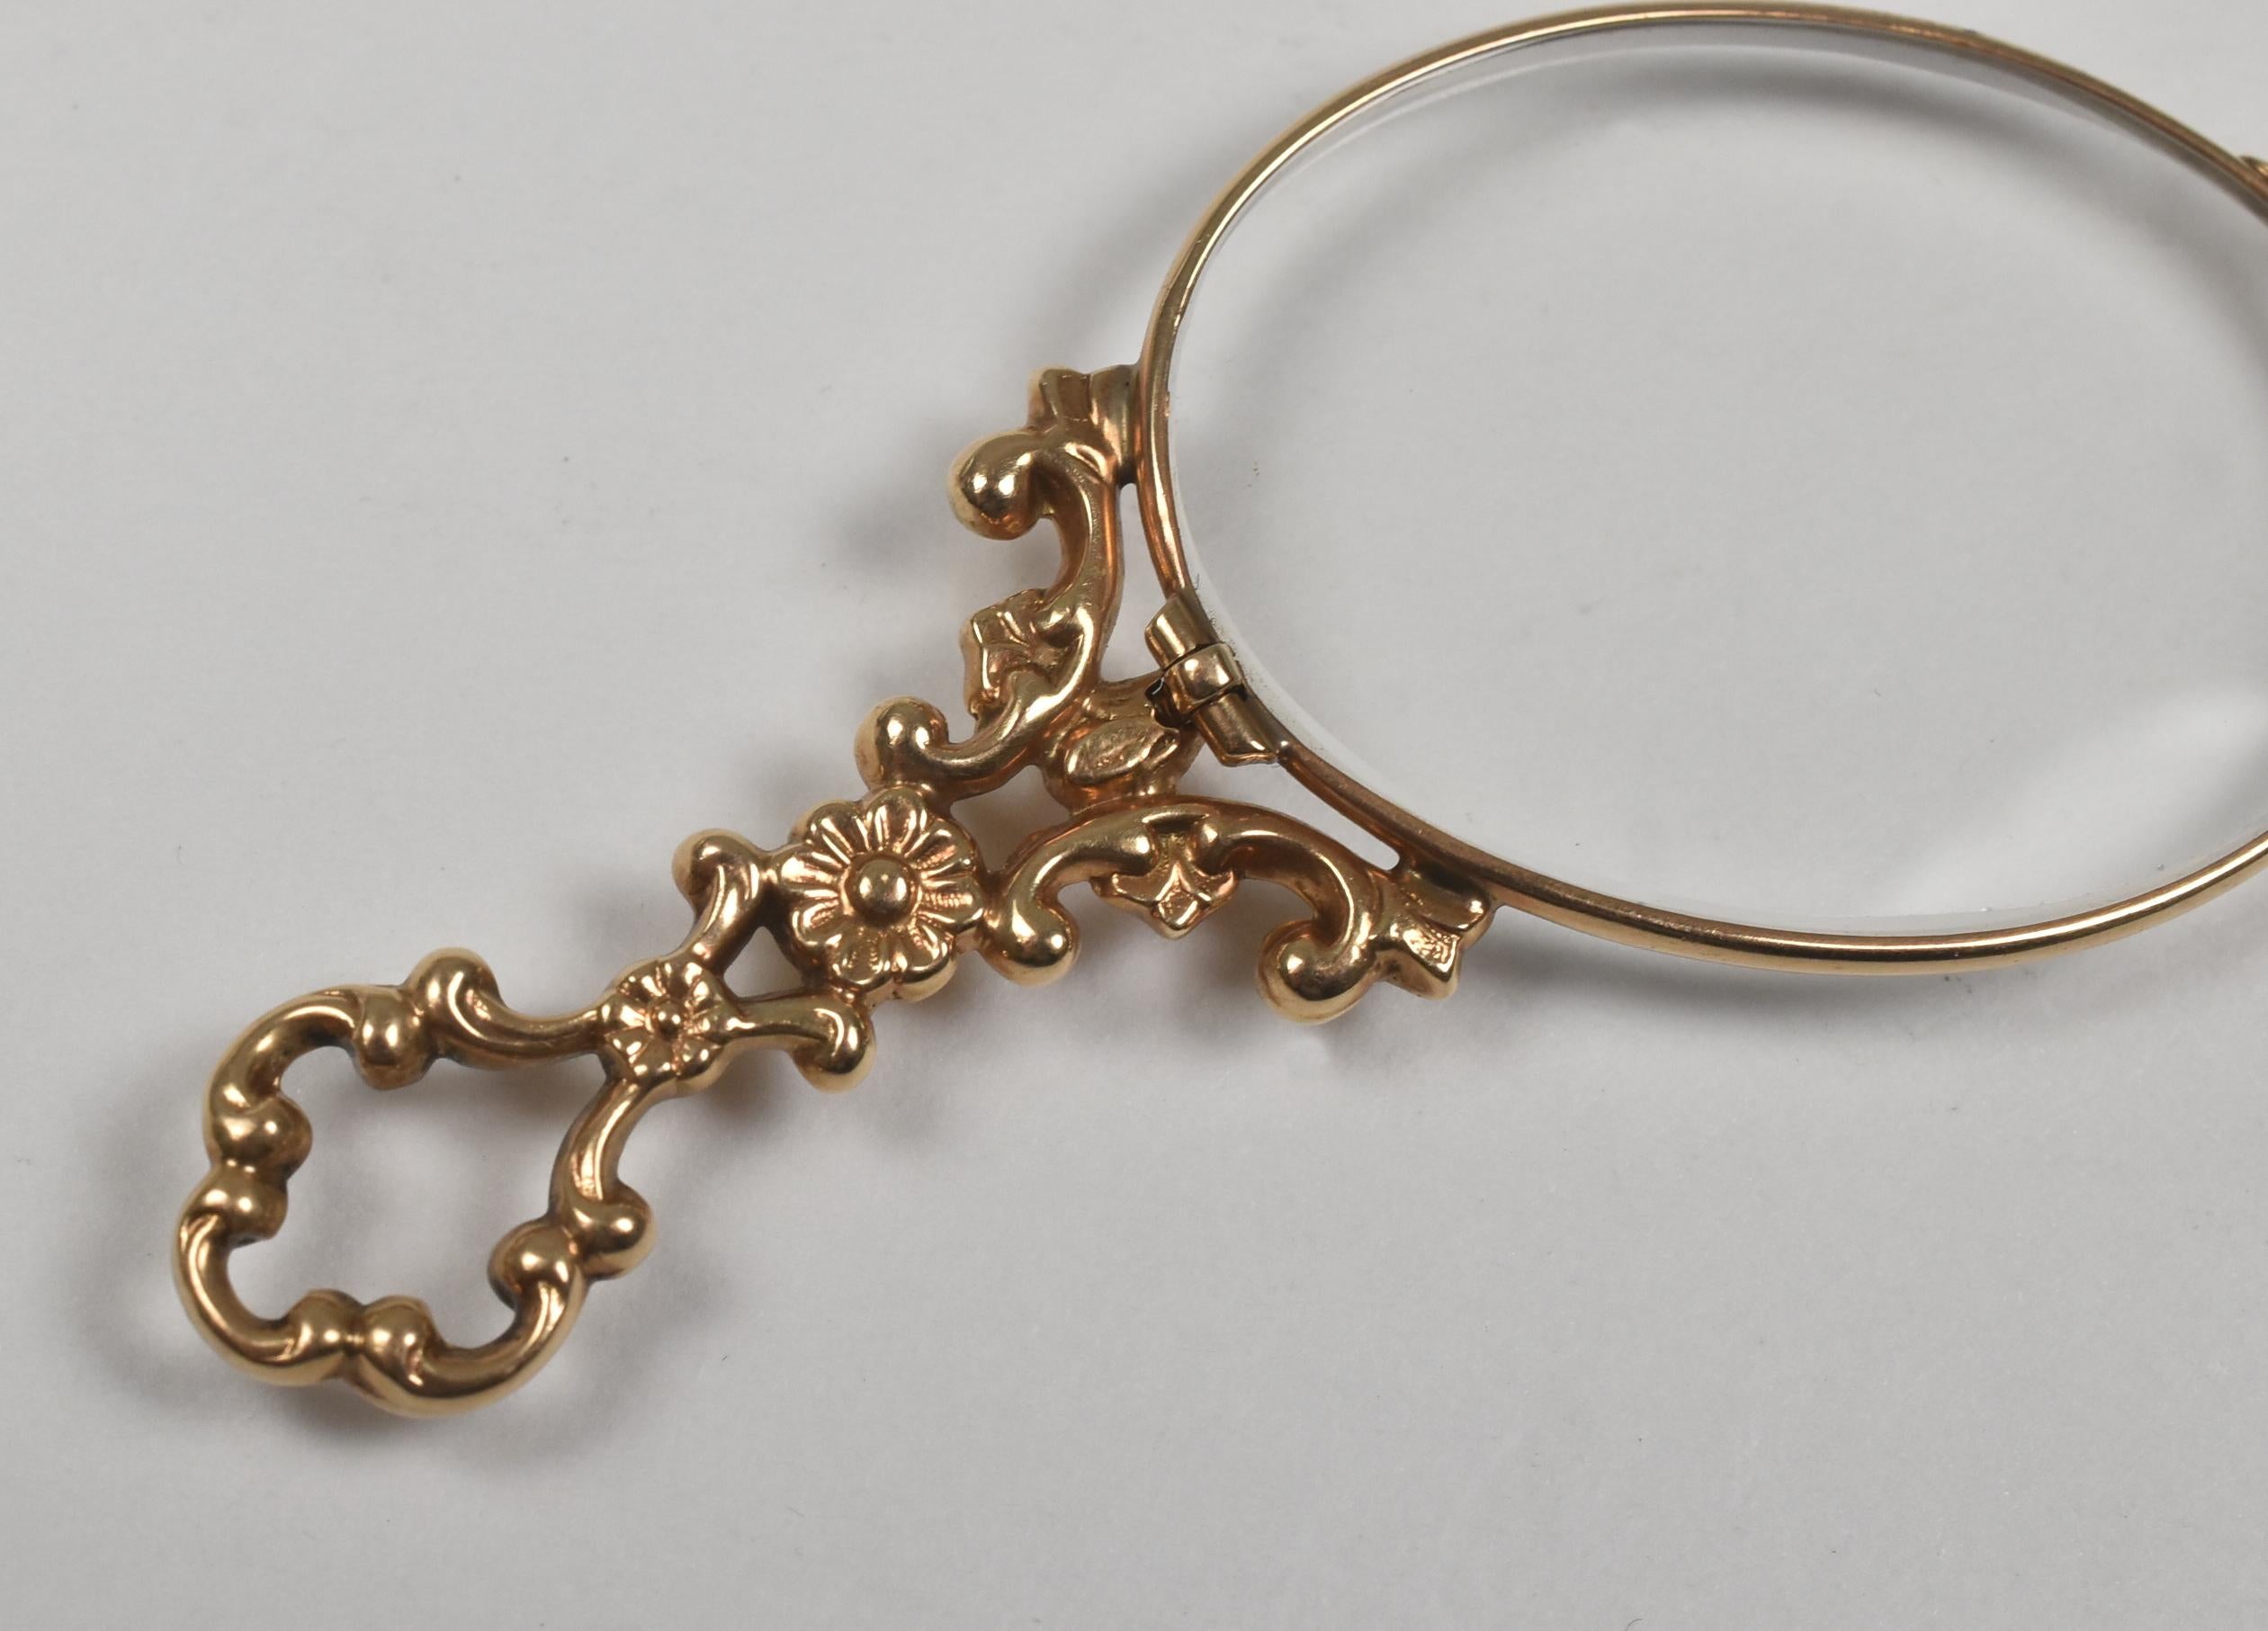 Ladies 14 carat yellow gold lorgnette spectacles. Frame is 3.75